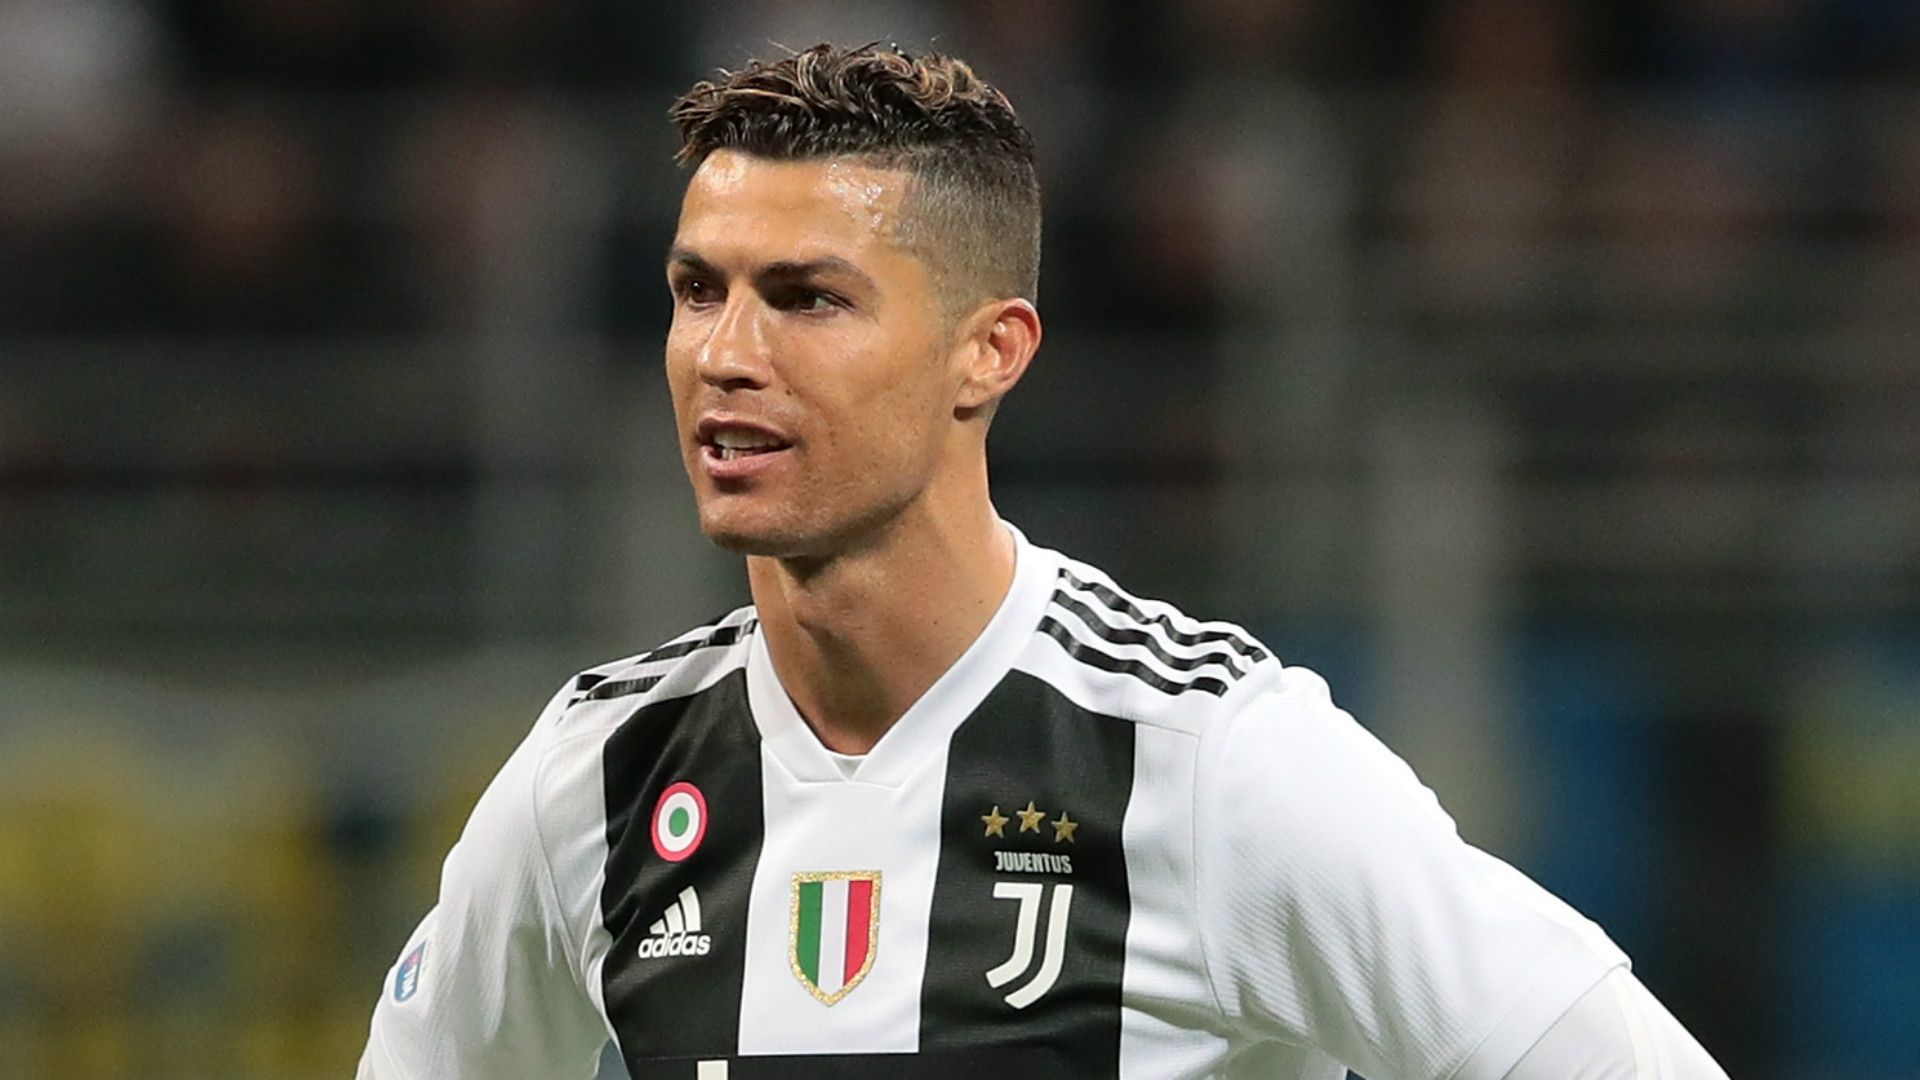 'I'm not ruling it out' - Cristiano Ronaldo hints at potential future in coaching ...